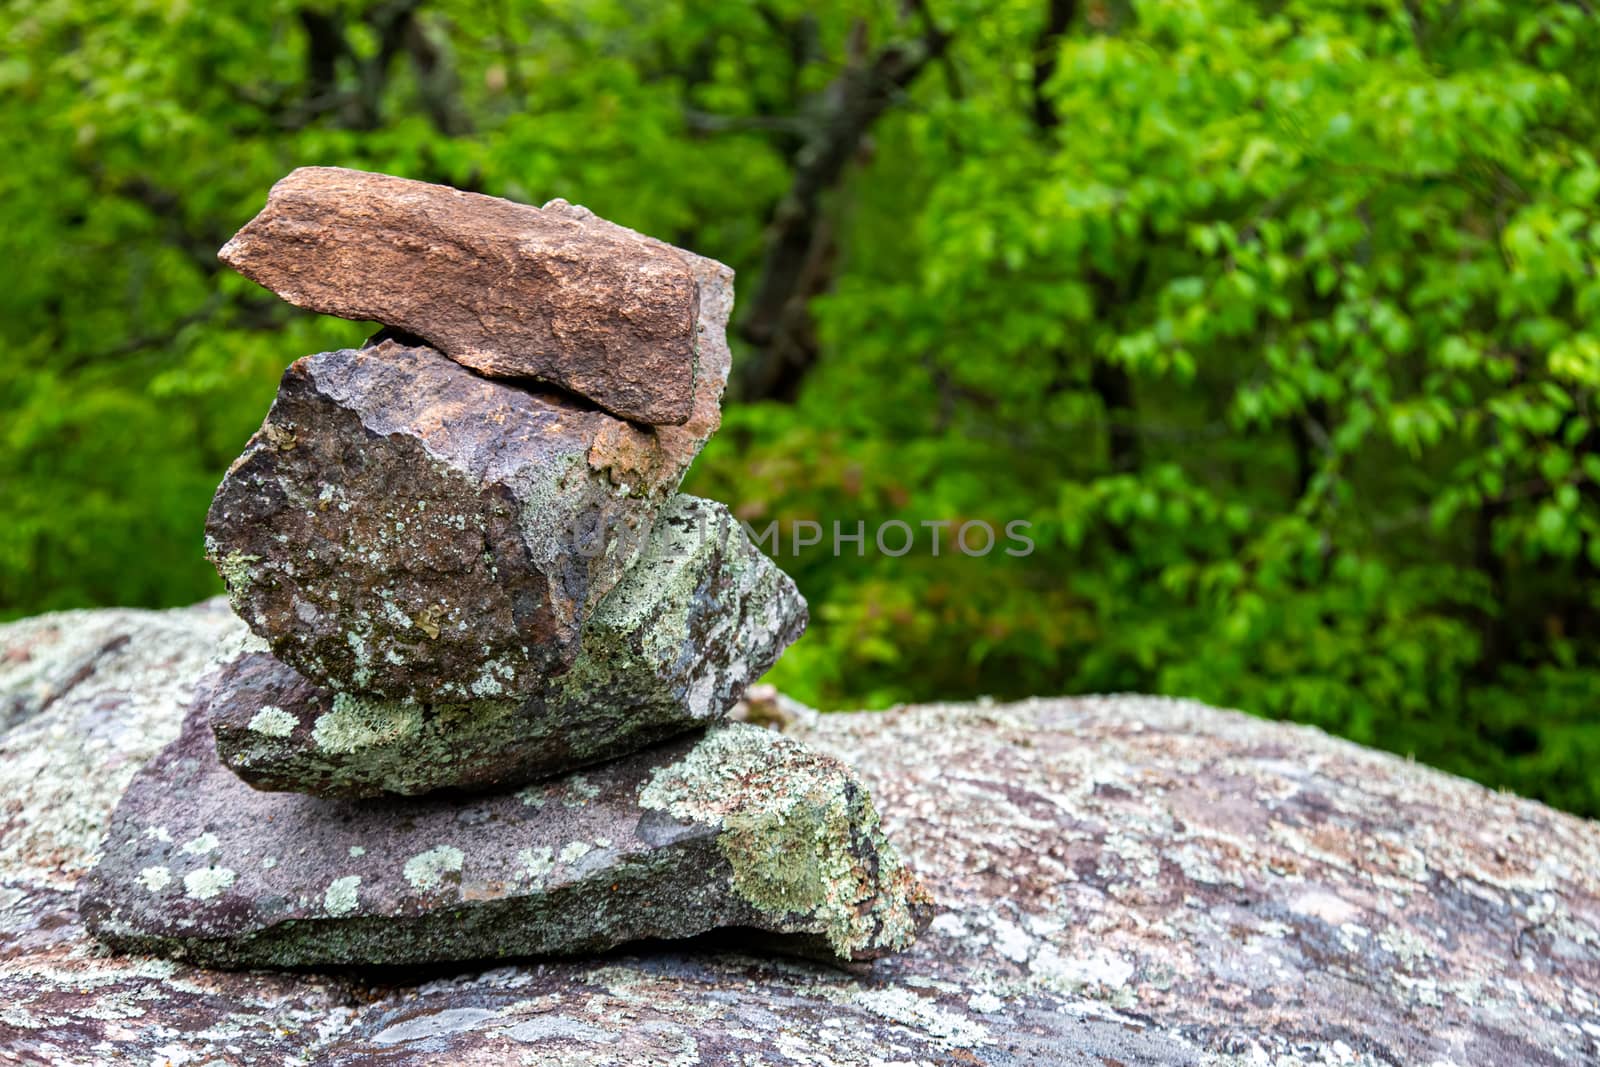 Stacked rocks serve as a marker on a forest hiking trail.